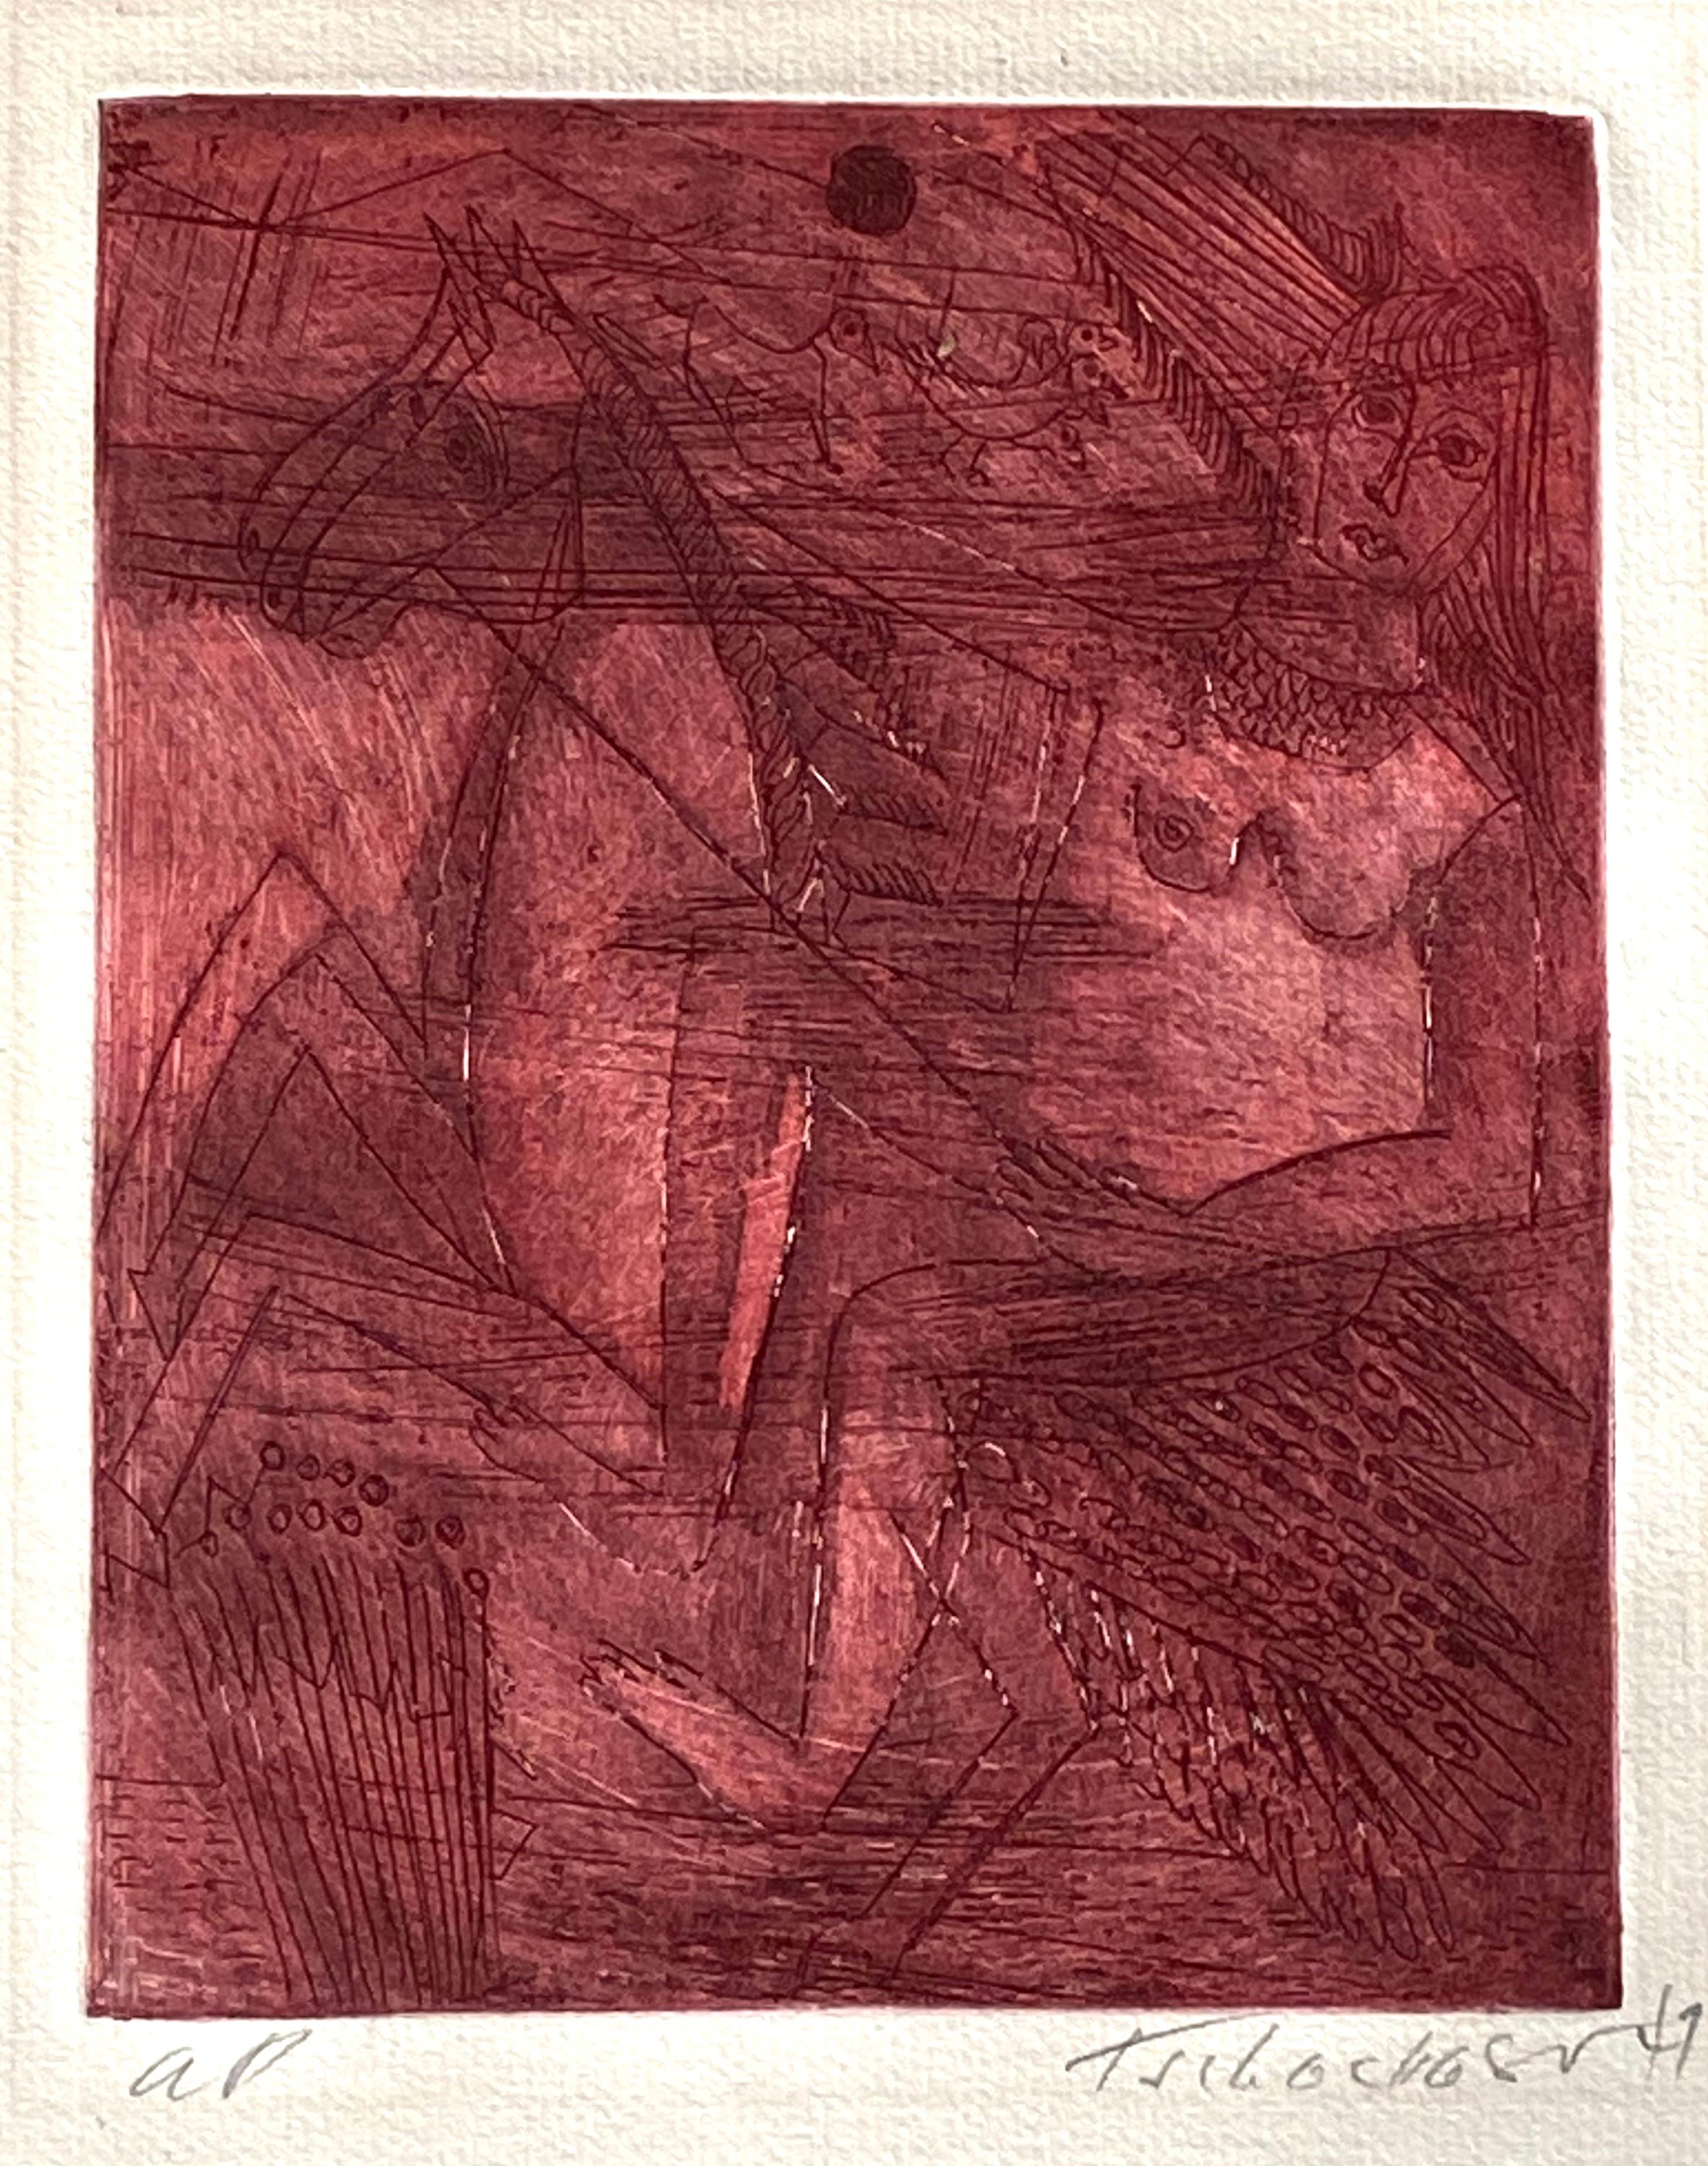 Hand colored original artist proof etching by the well known Russian/American artist Nahum Tschacbasov.  Marked “AP” lower left for artist proof in pencil. Signed by the artist lower right in pencil and dated 1947. Condition is very good. Image size